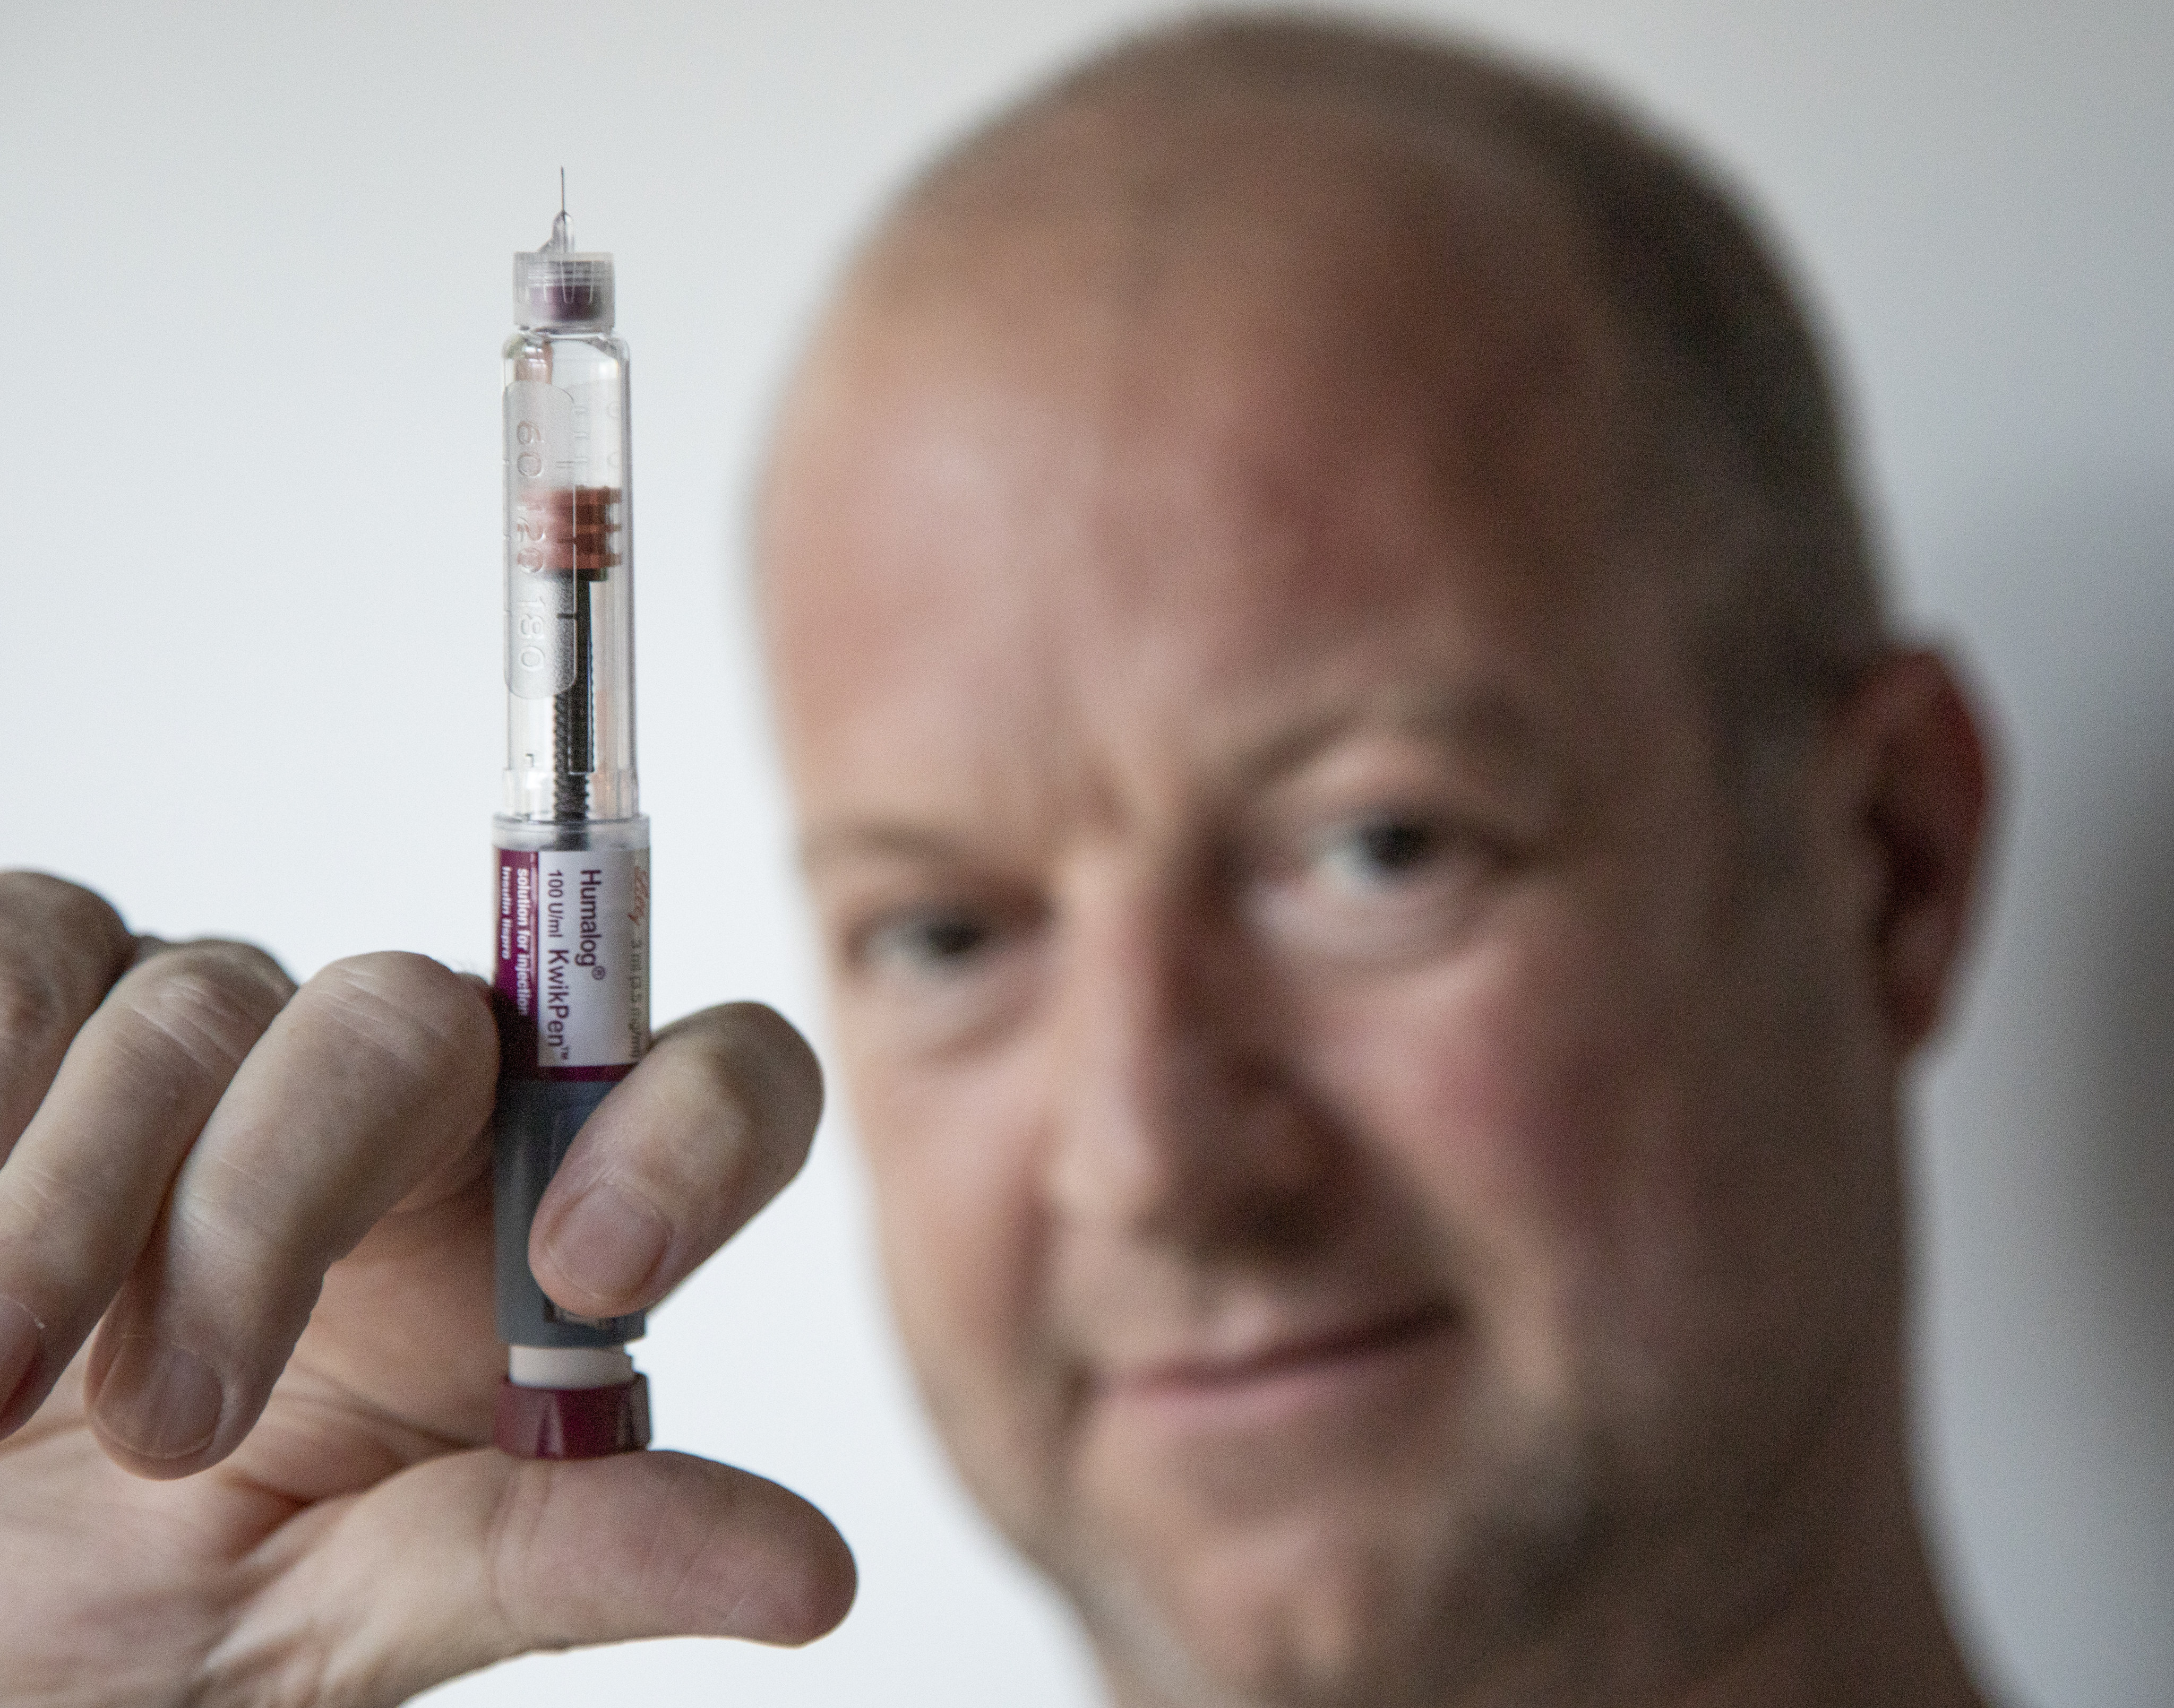 Simon O’Reilly, a production editor at the South China Morning Post, holds a Humalog KwikPen, a pre-filled fast-acting insulin pen used to treat diabetes. The type 1 diabetic recently injected four times too much of this insulin, which saw him rushed to hospital. Photo: Antony Dickson